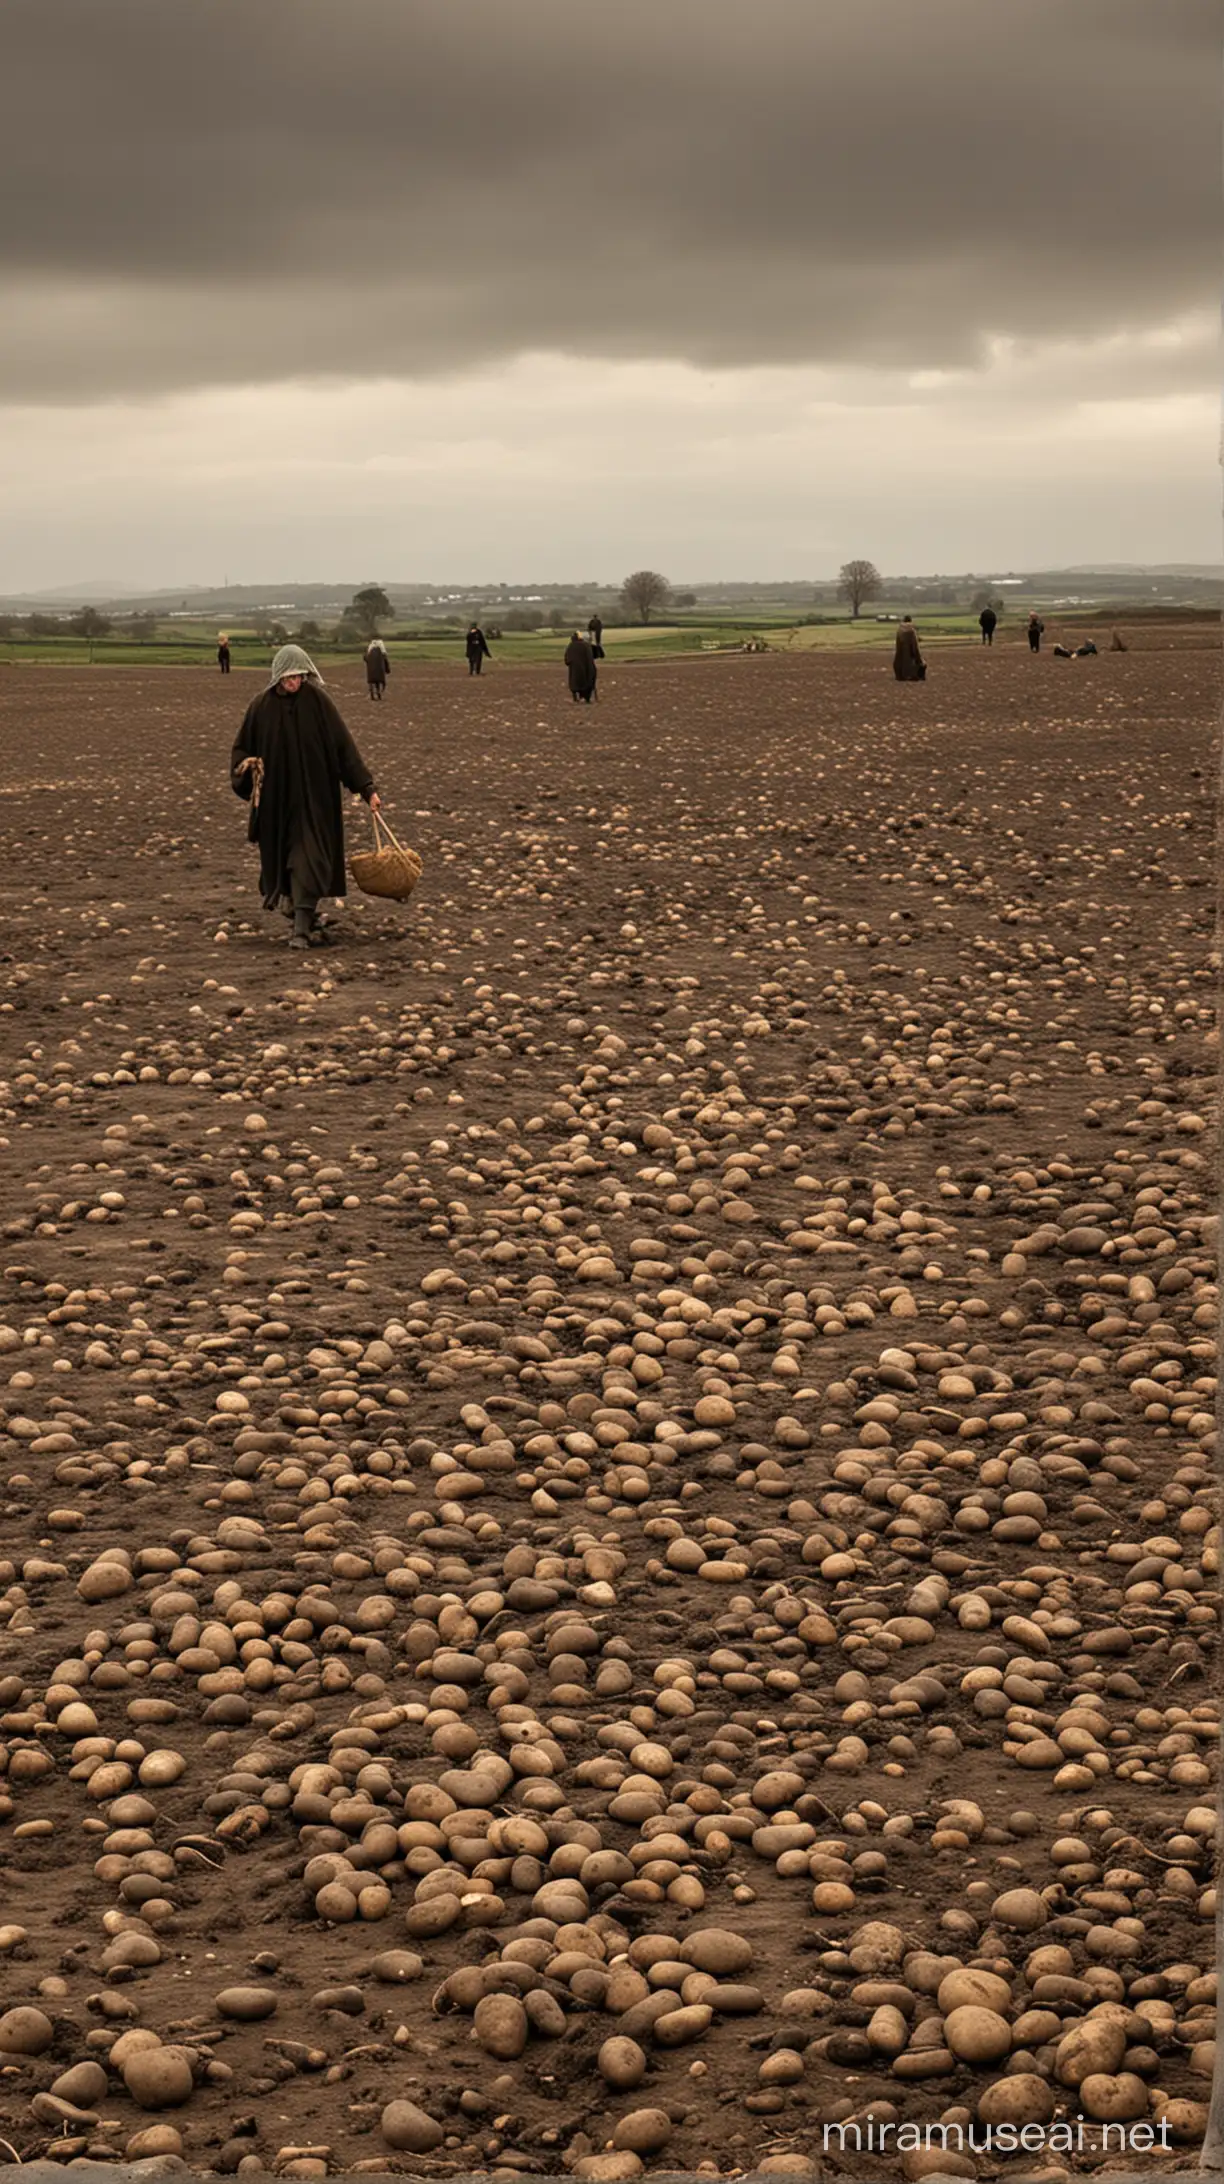 Traces of the Potato Famine: A picture depicting the effects of the potato famine in Ireland; it may include empty fields, starving people, or deceased individuals.

